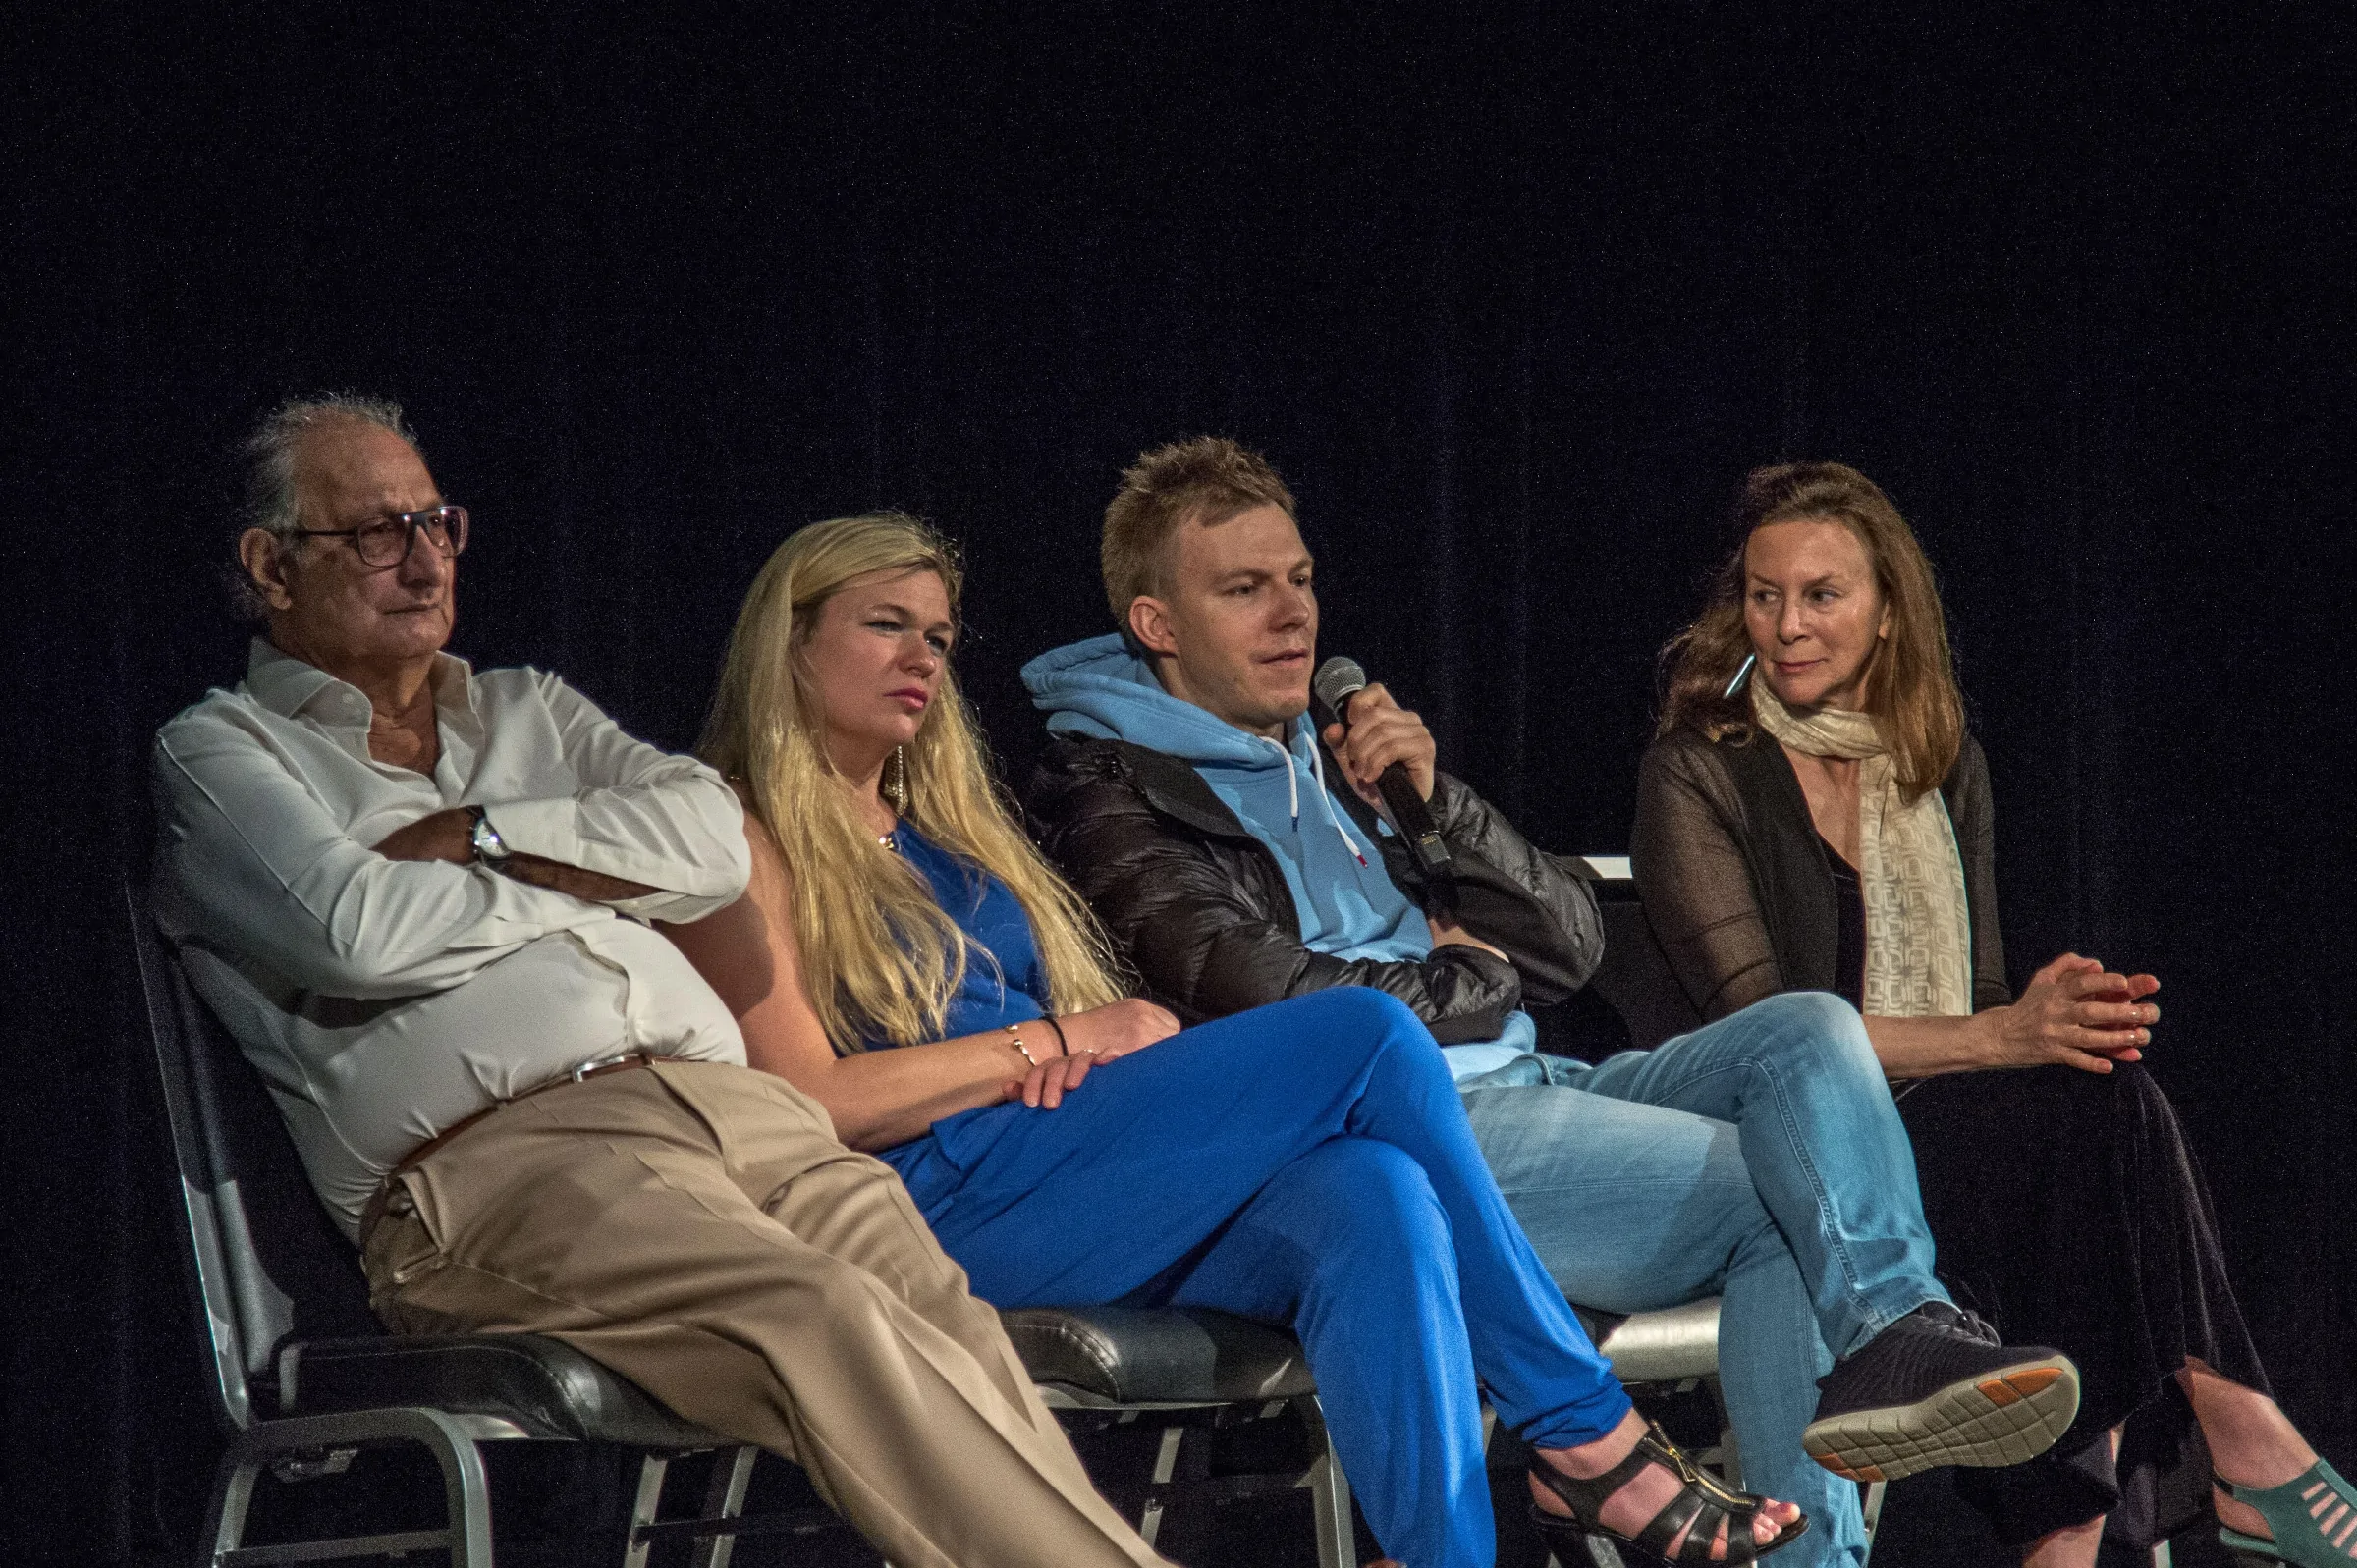 Zia Mahmood, Christina Lund Madsen, Boye Brogeland and Jackie Paré at a Q&A about ACES & KNAVES